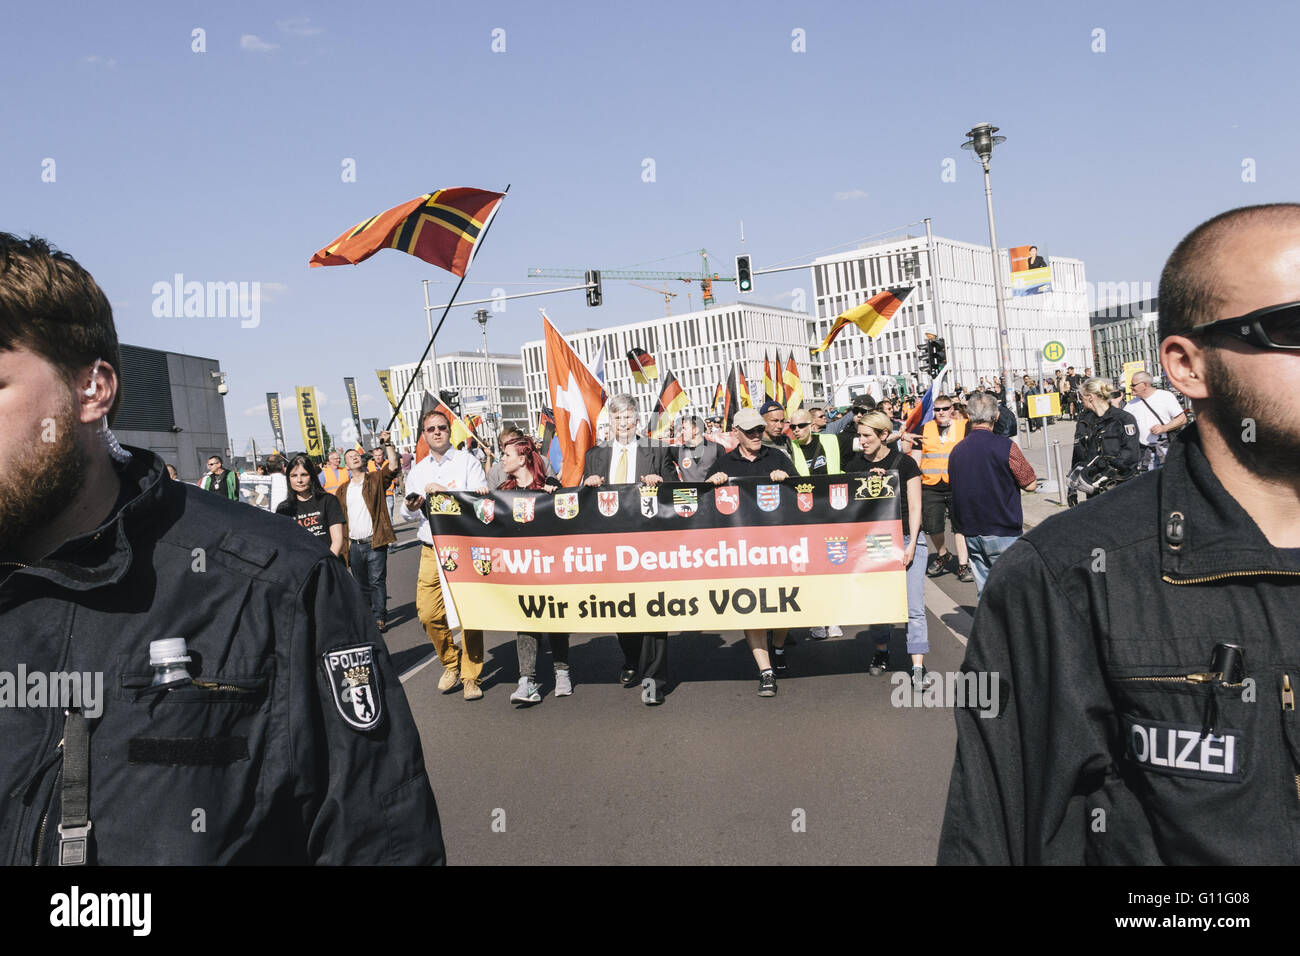 Berlin, Berlin, Germany. 7th May, 2016. 'We for Germany. We are the People' Protesters holding a banner during the rally held under the motto 'Merkel muss weg![Merkel must go]' organised by far-right group 'We for Berlin & We for Germany' Credit:  Jan Scheunert/ZUMA Wire/Alamy Live News Stock Photo